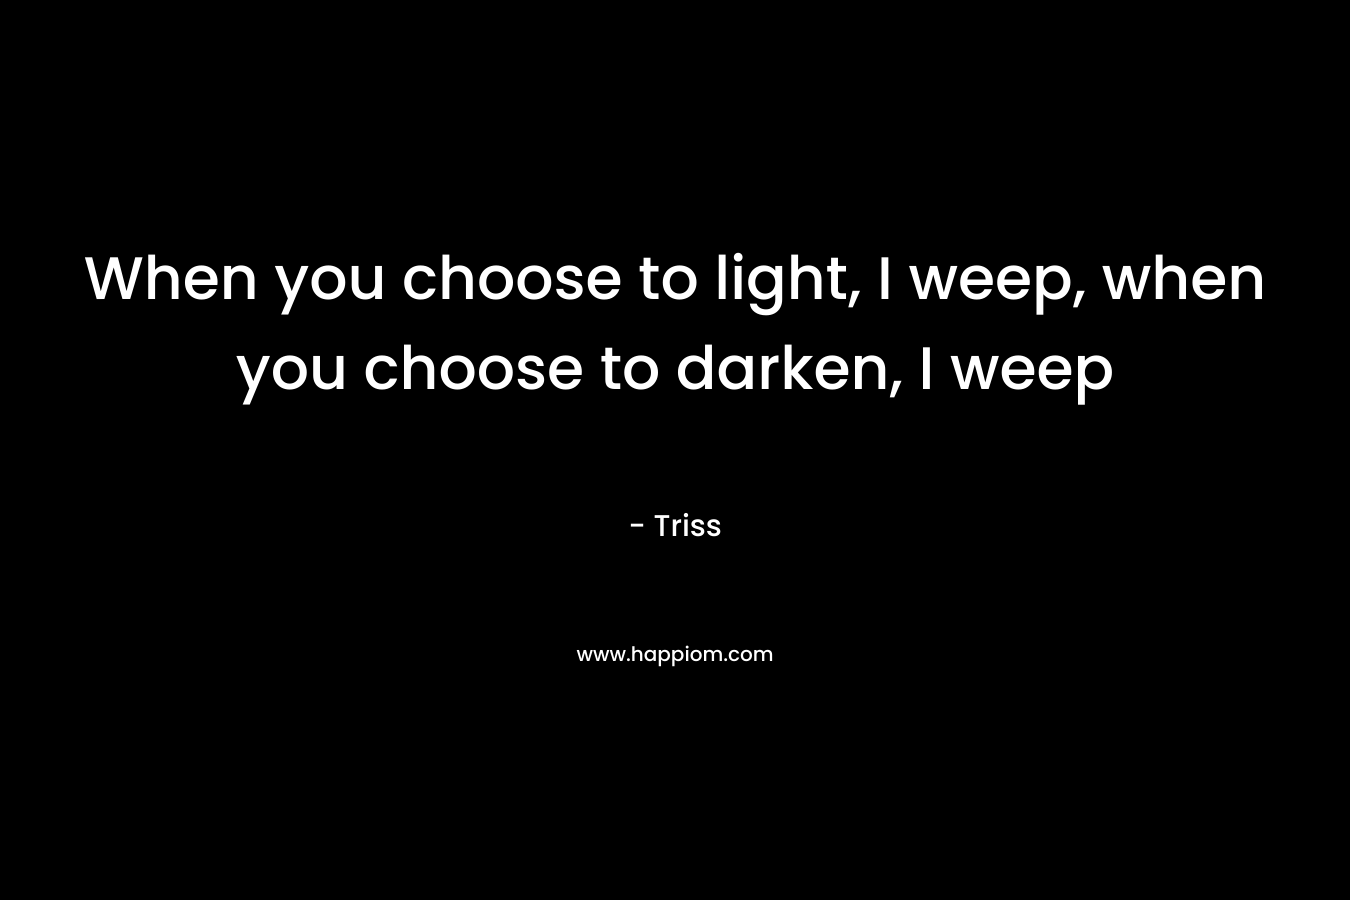 When you choose to light, I weep, when you choose to darken, I weep – Triss